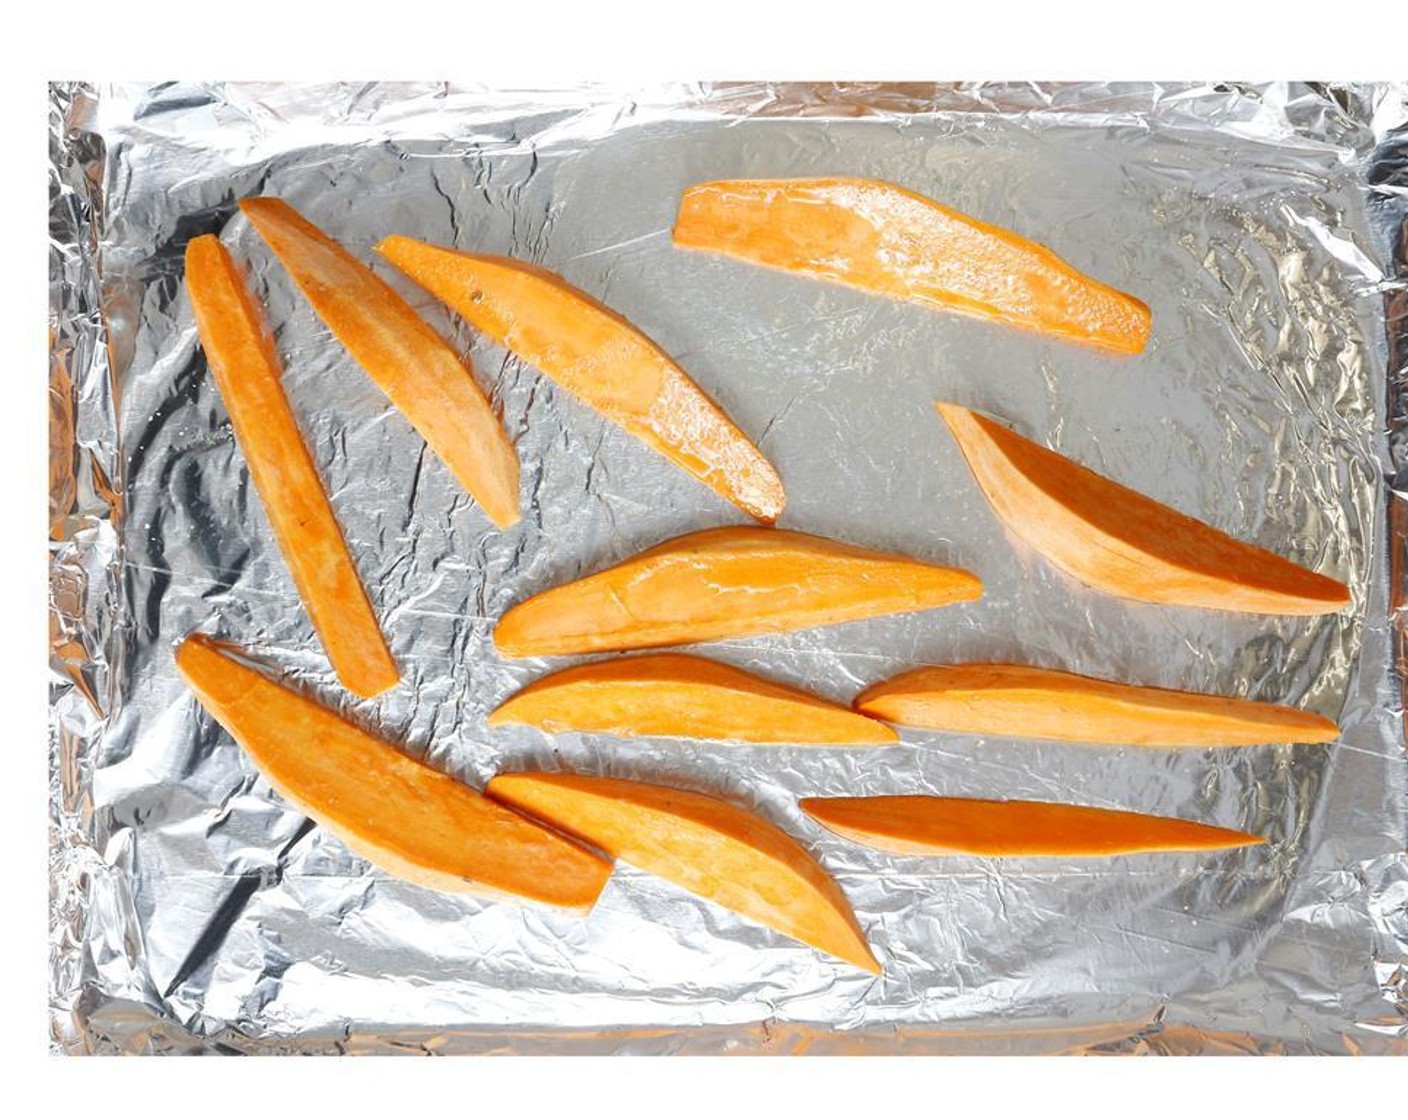 step 3 Toss the sweet potato wedges with Olive Oil (1 Tbsp), Salt (to taste) and Ground Black Pepper (to taste). Spread out on a foil-lined baking sheet with the sliced red onion. Roast for 20 min, flip after 10 min.